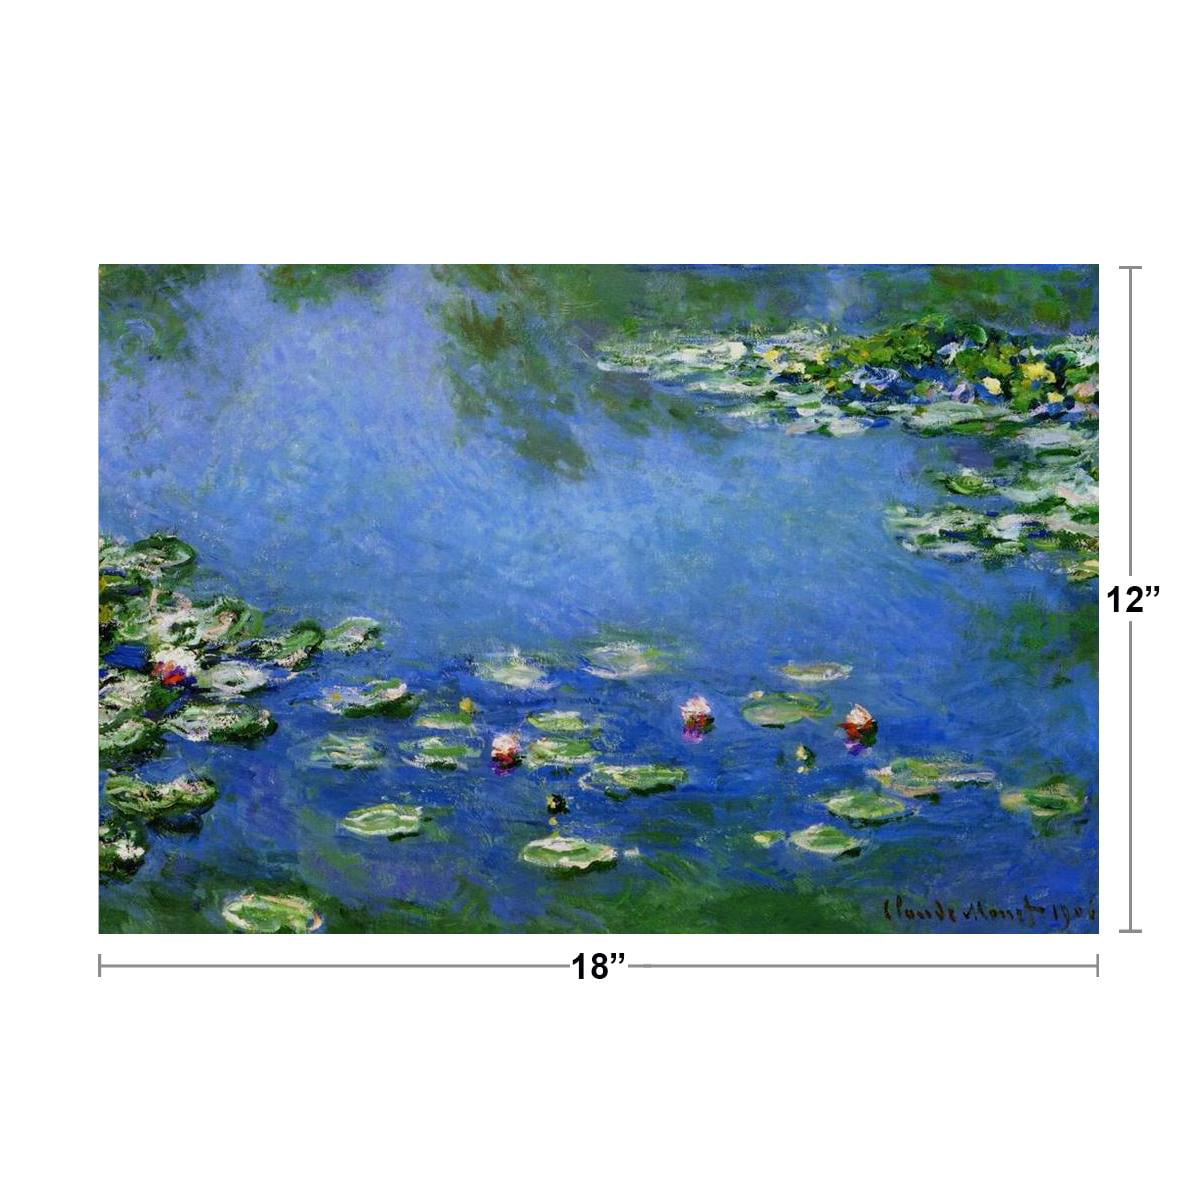 Claude Monet Water Lilies Nympheas 1906 Oil On Canvas French Impressionist  Painting Cool Wall Decor Art Print Poster 16x24